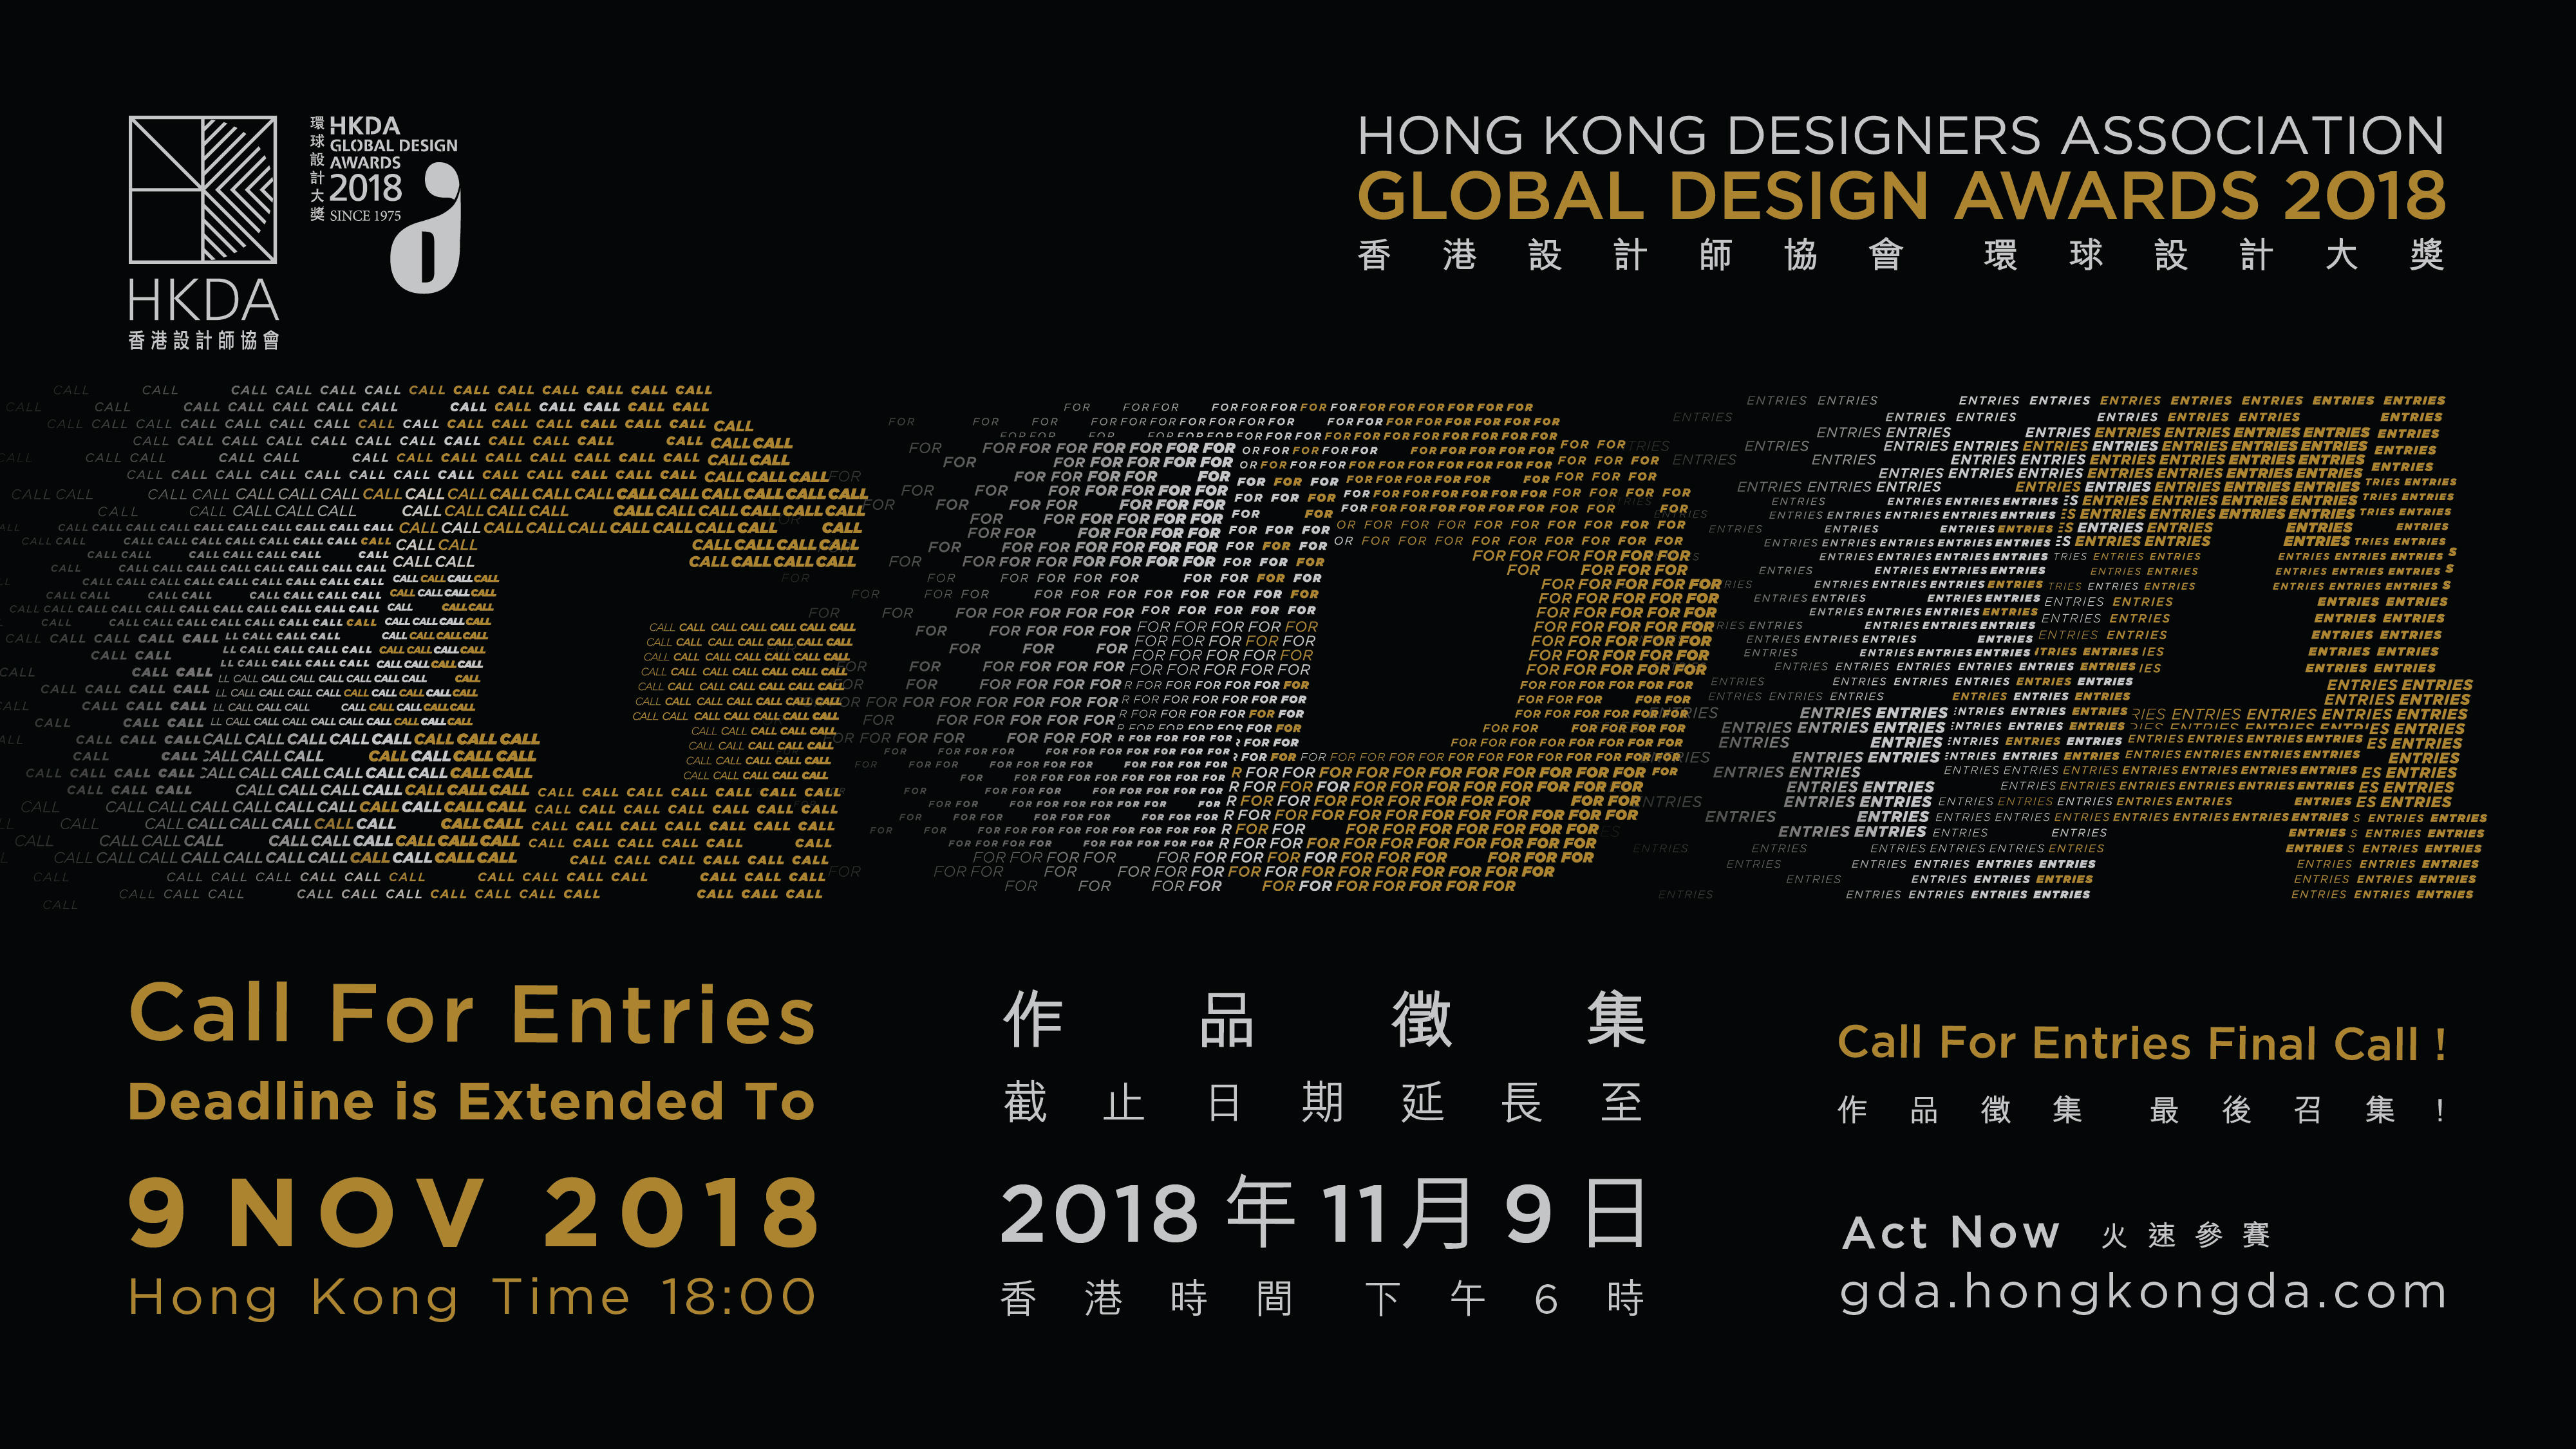 Supporting Event - Hong Kong Designers Association Global Design Awards 2018 is now open for international entries